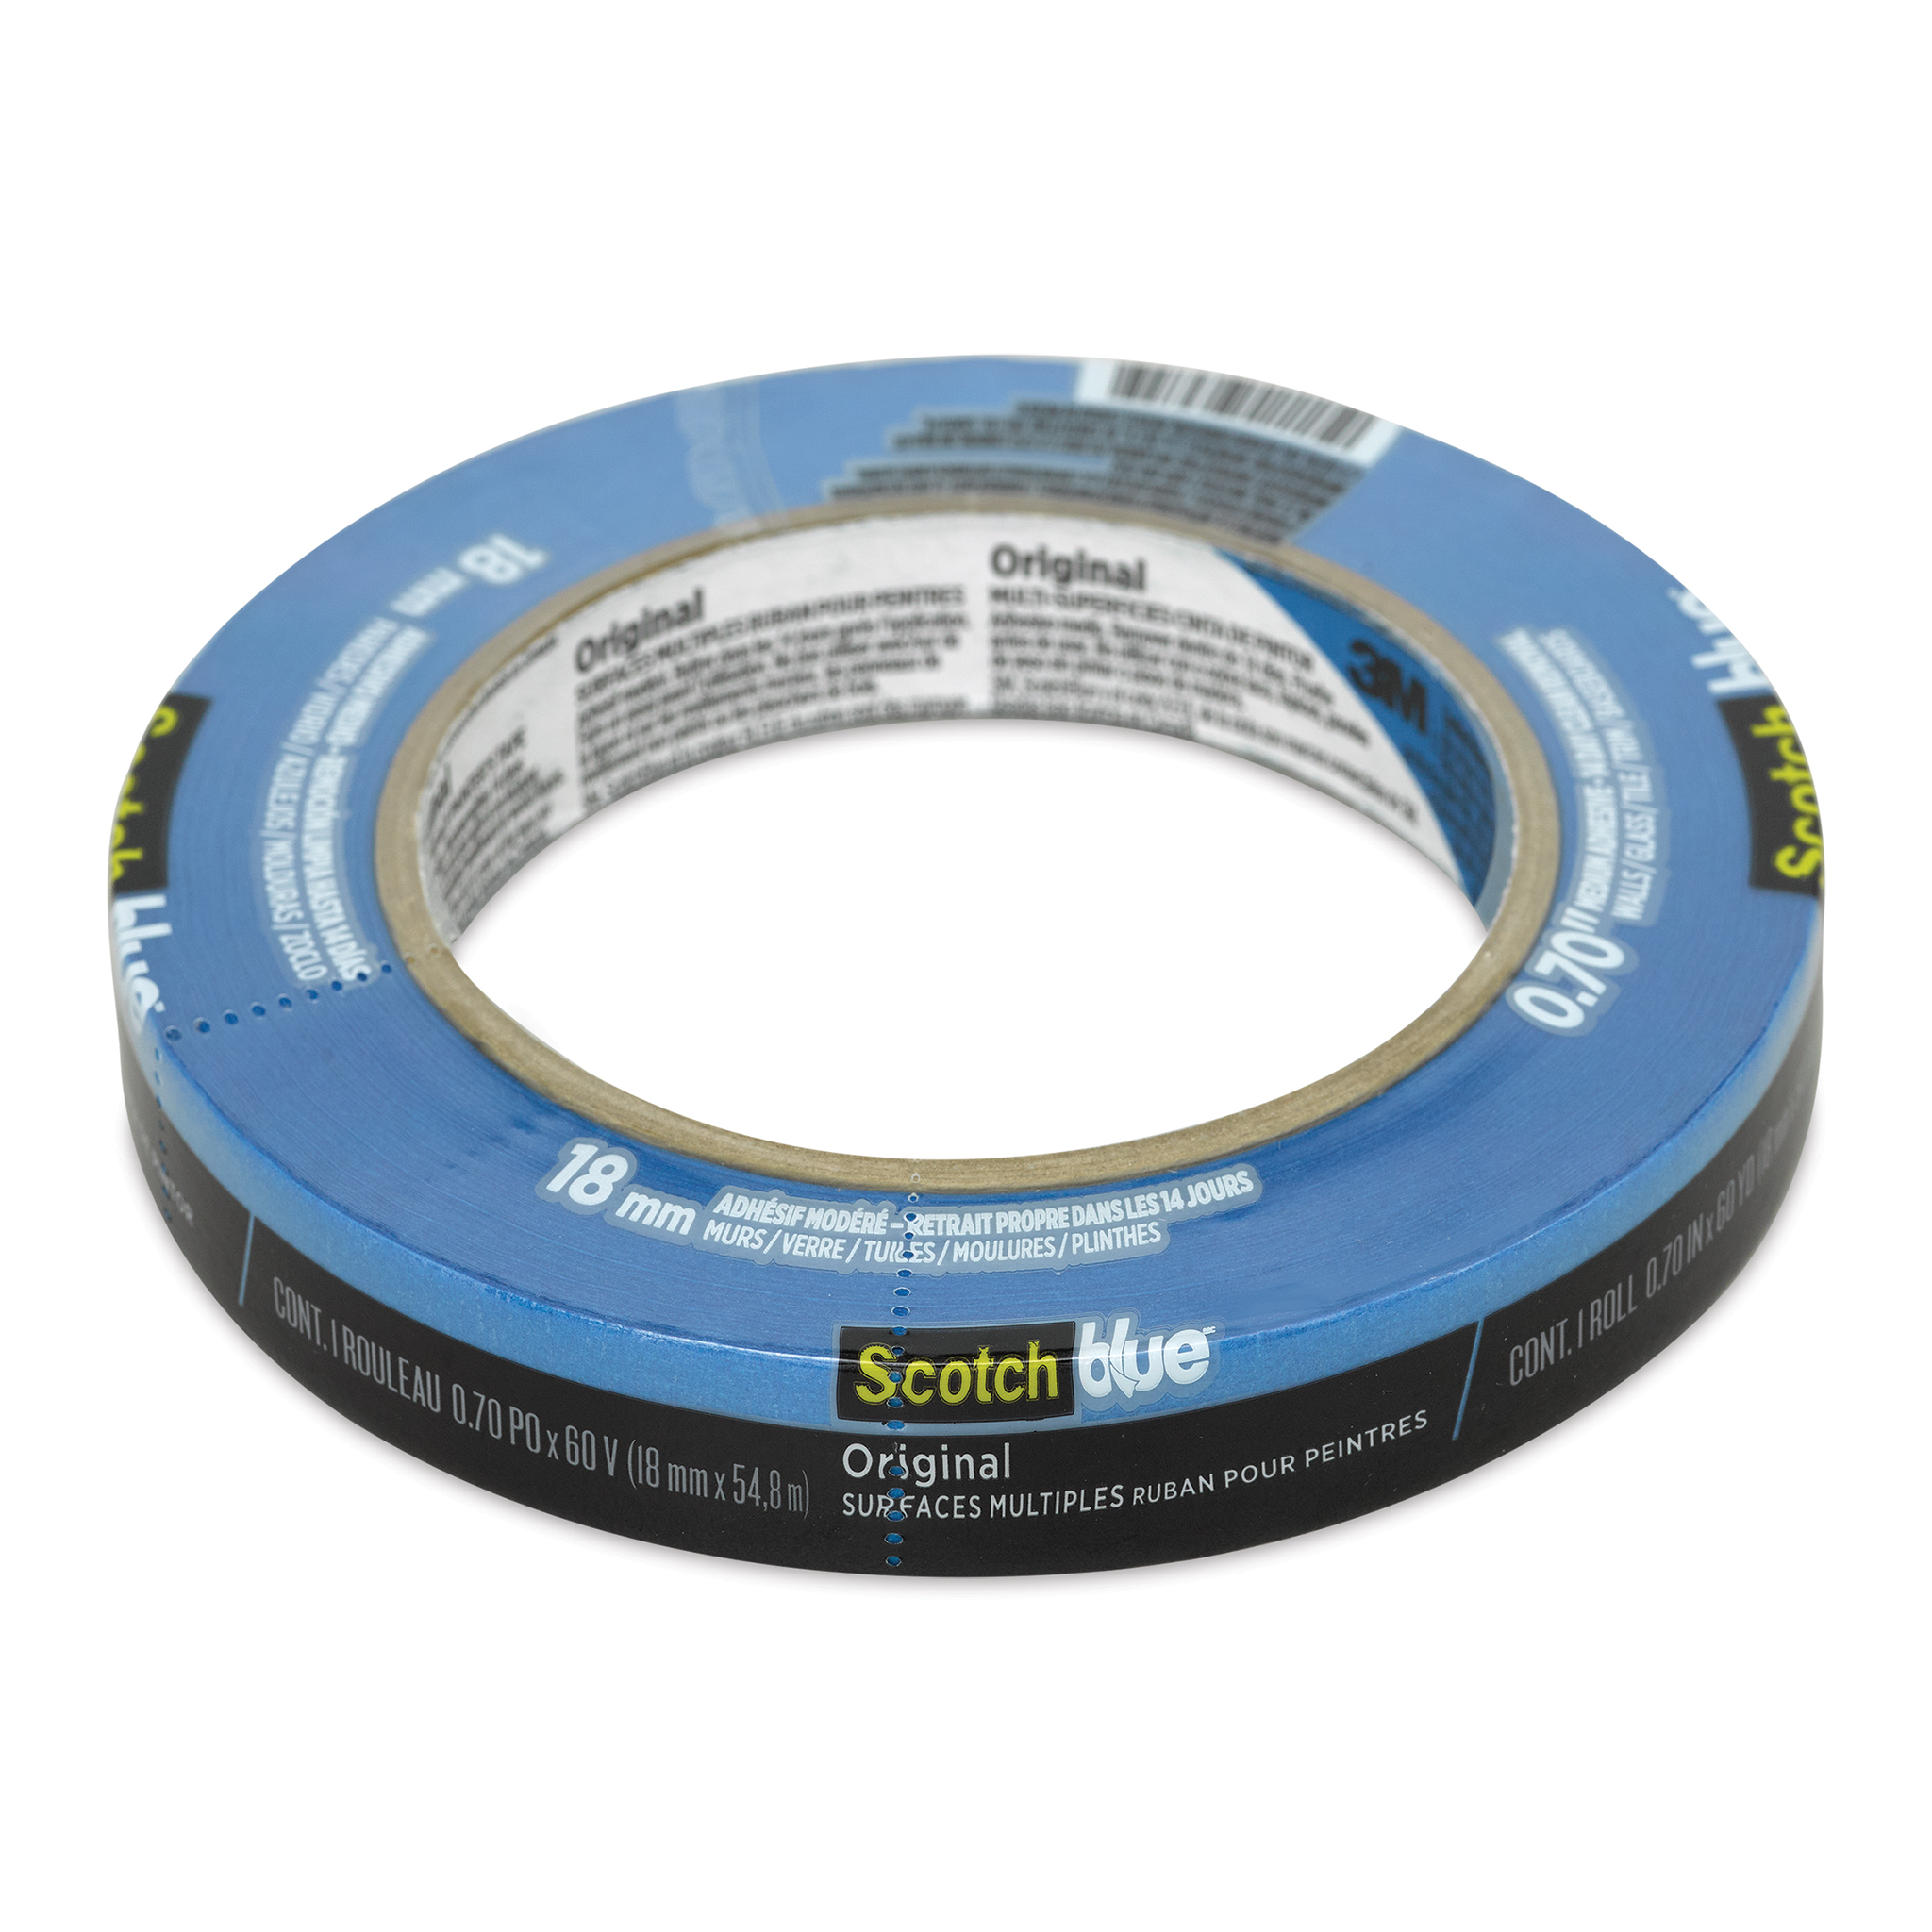 Professional Painter's Tape, 1.41 in. x 54 yd.